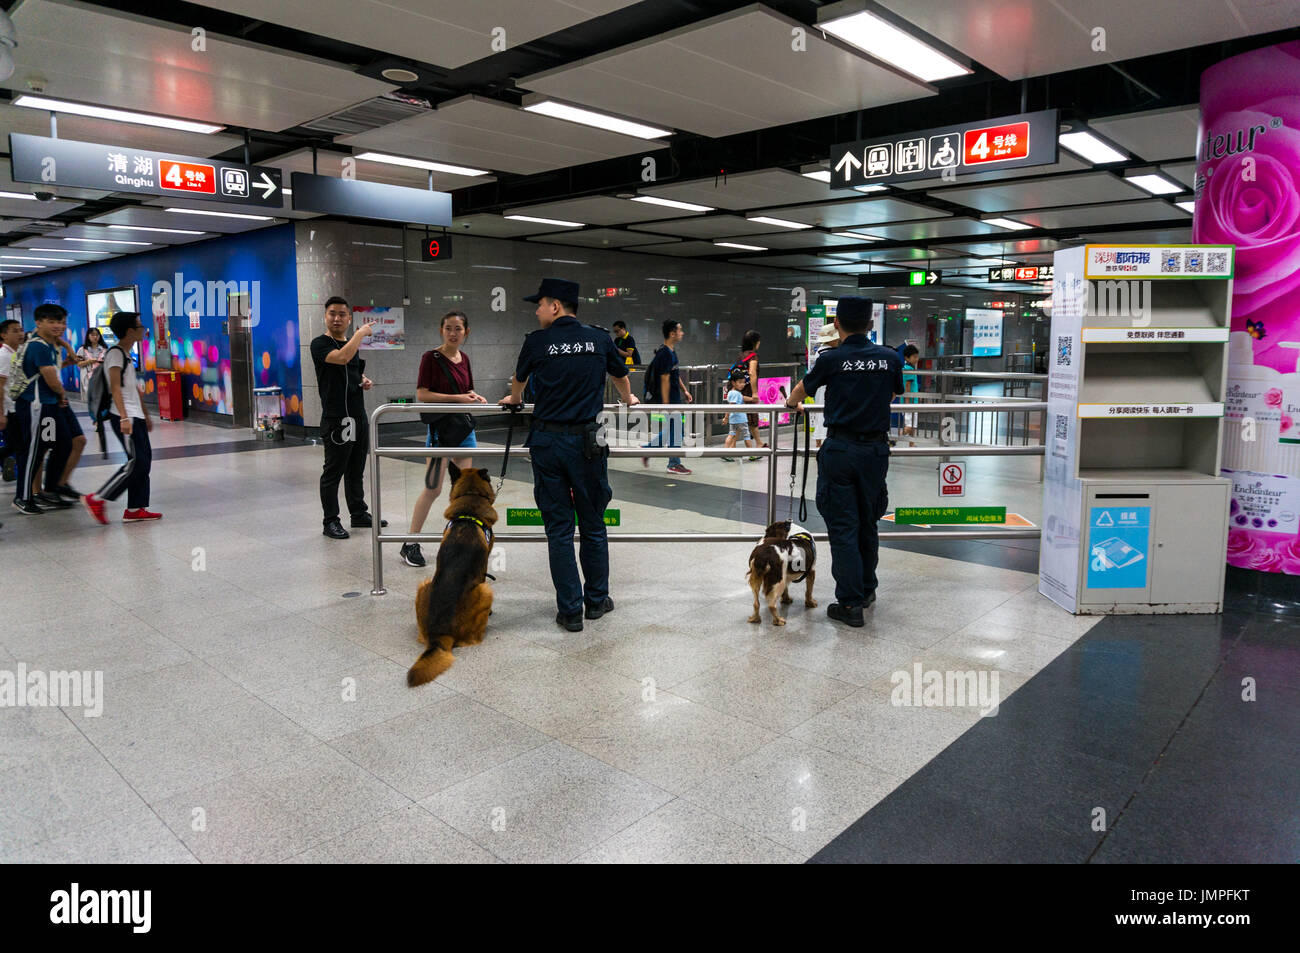 Police dogs on duty in the subway in Shenzhen, China Stock Photo